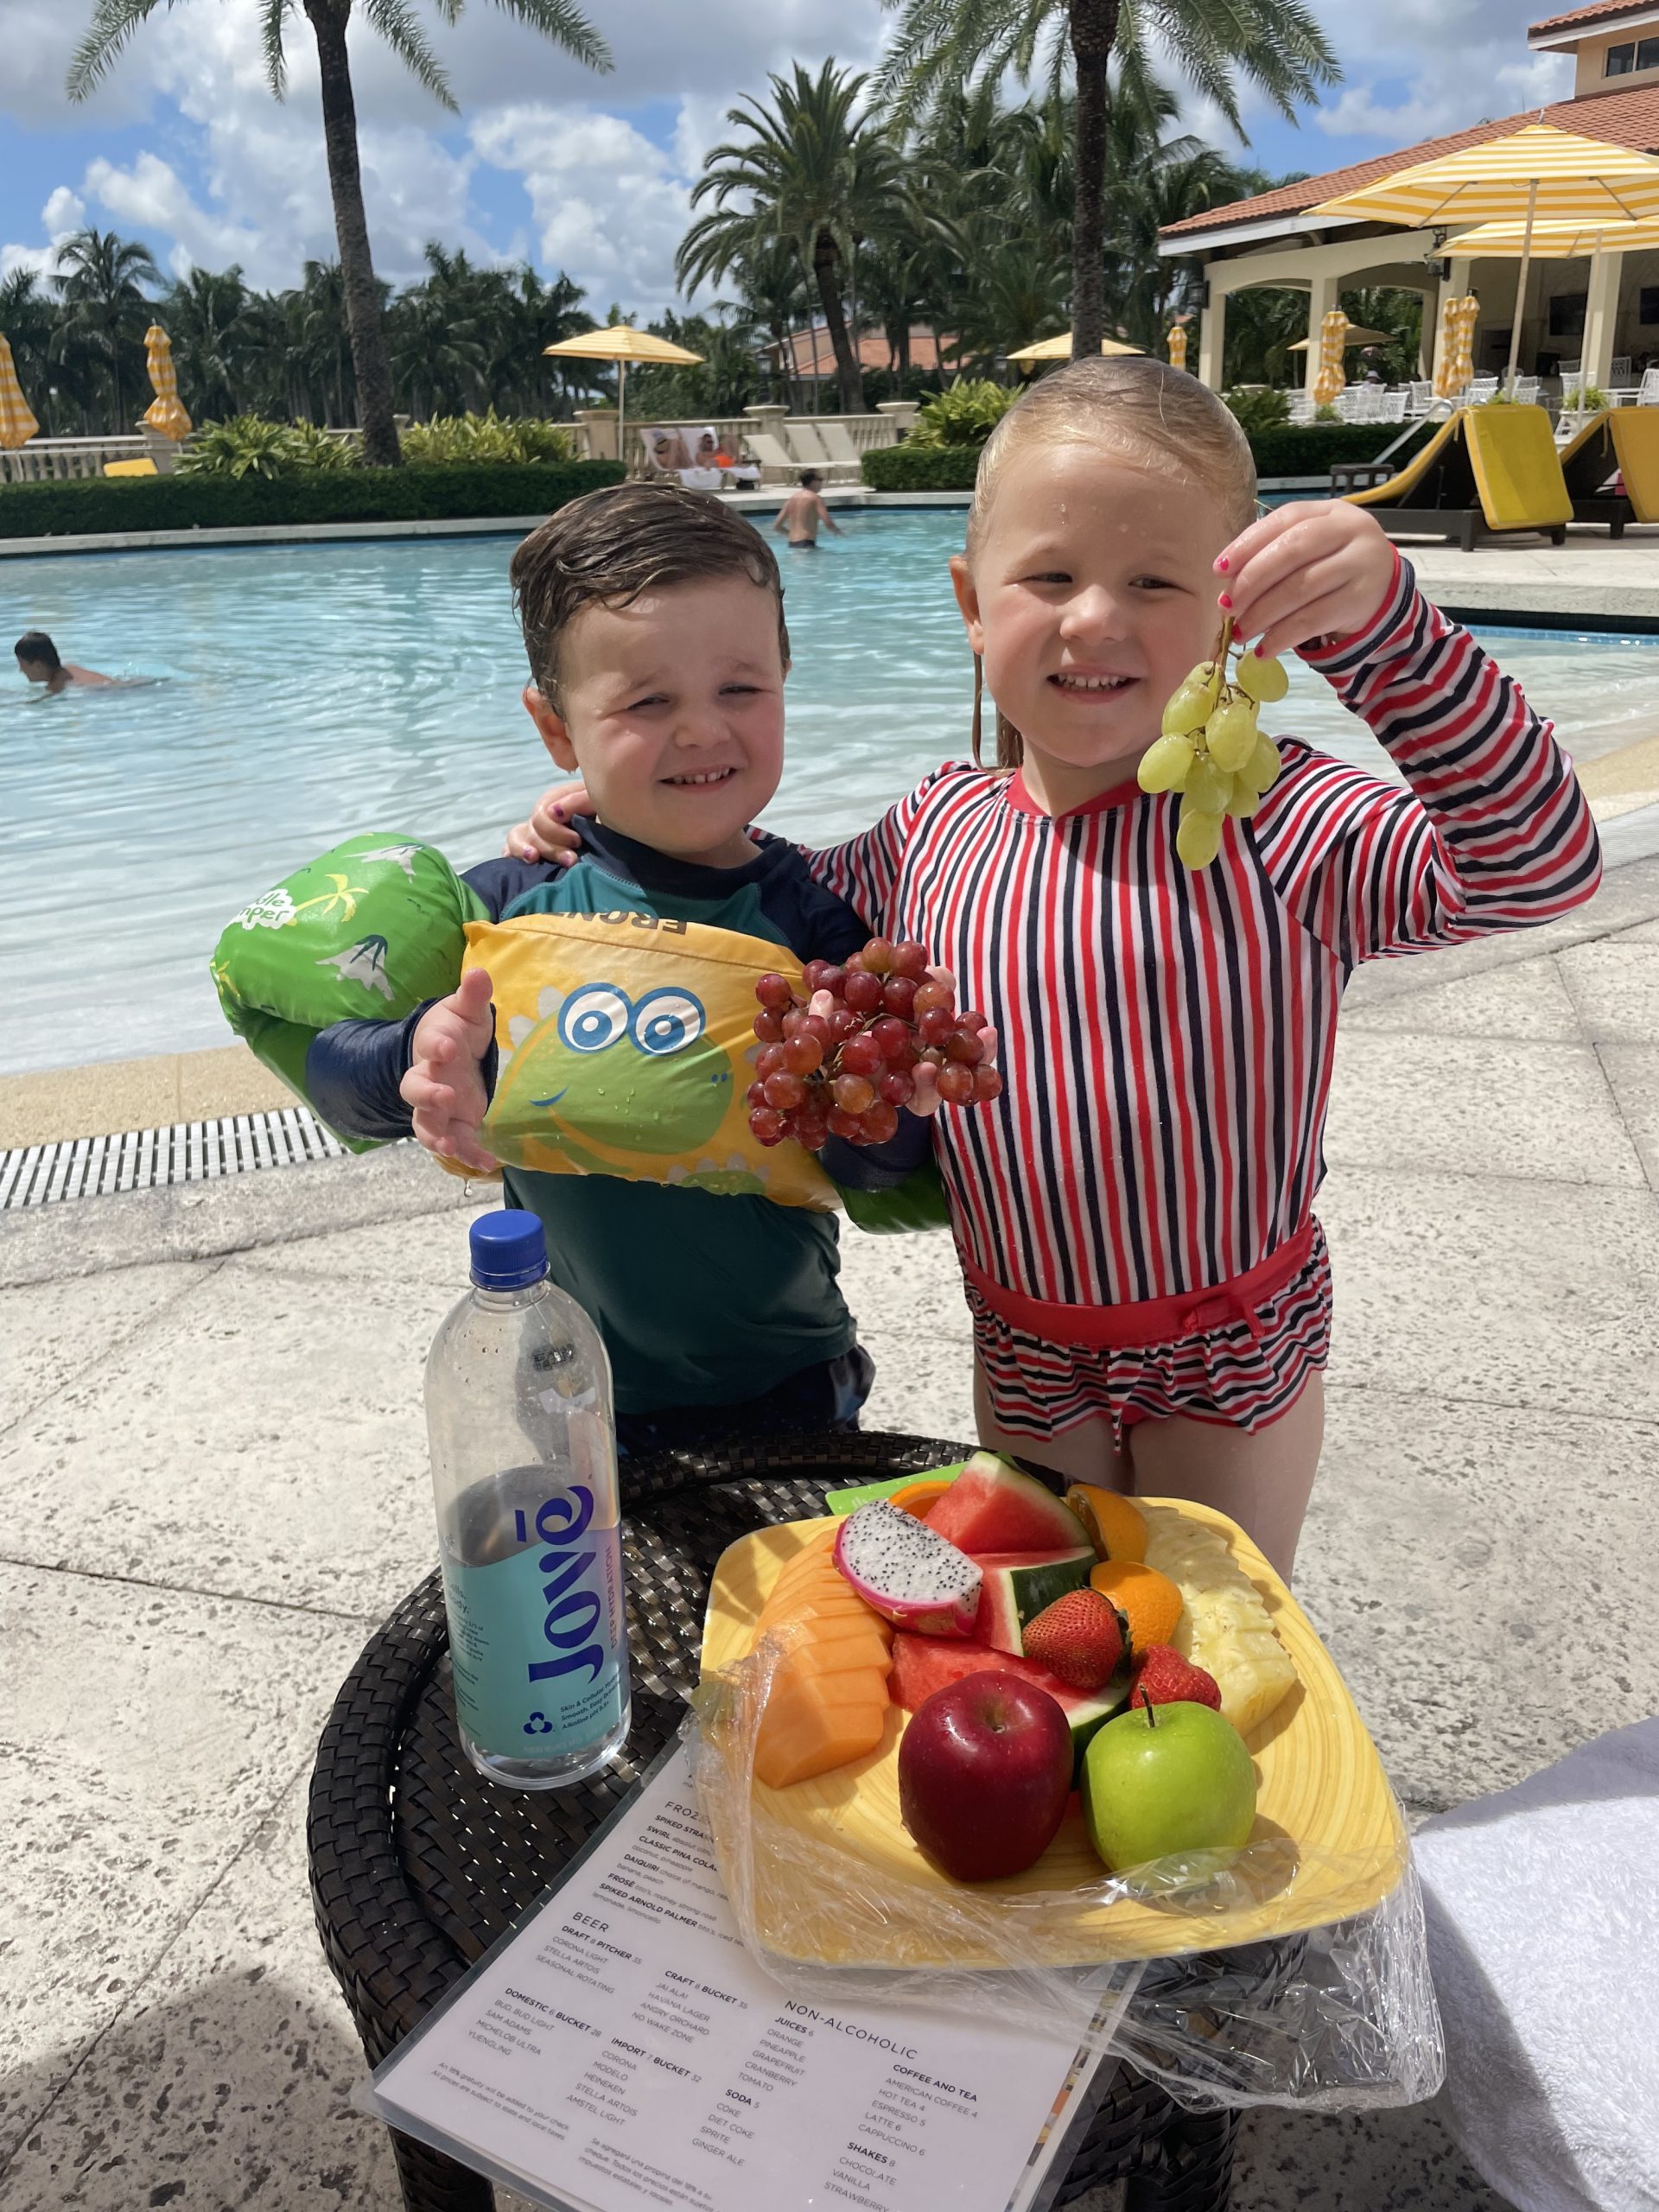 Trump National Doral Miami Mom Collective Staycation 